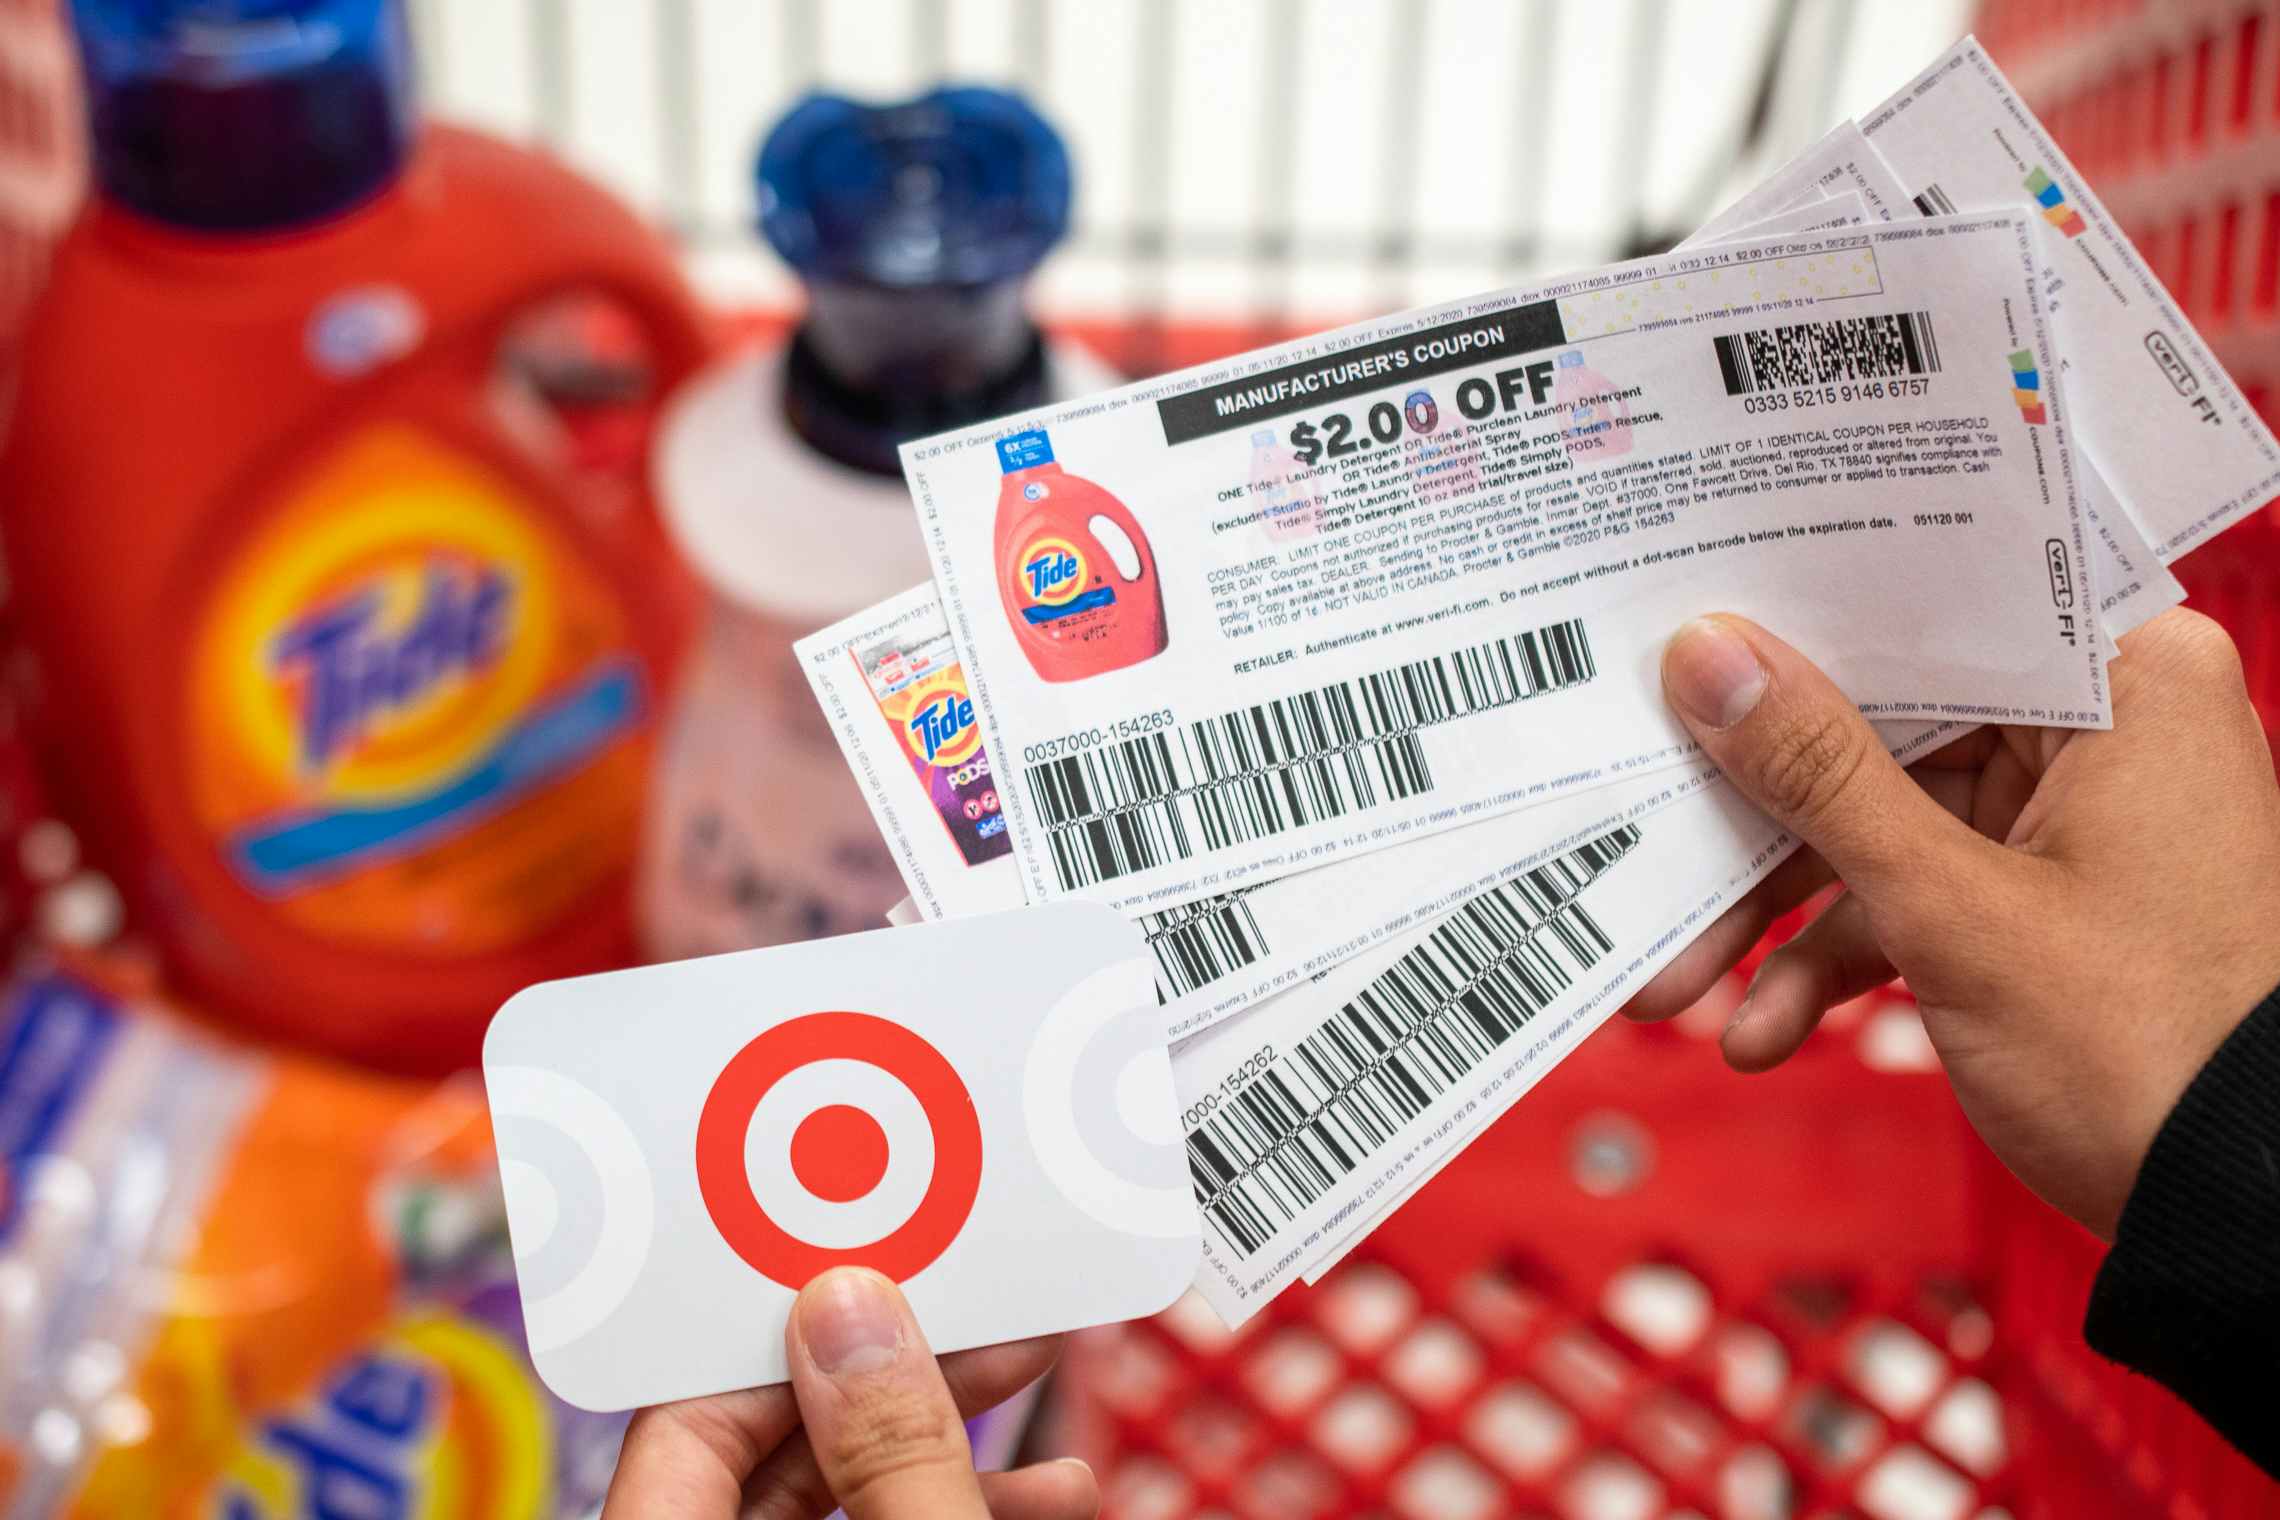 A person holding tide manufacture coupons in one hand and a Target gift card in the other, with a shopping card containing laundry ...